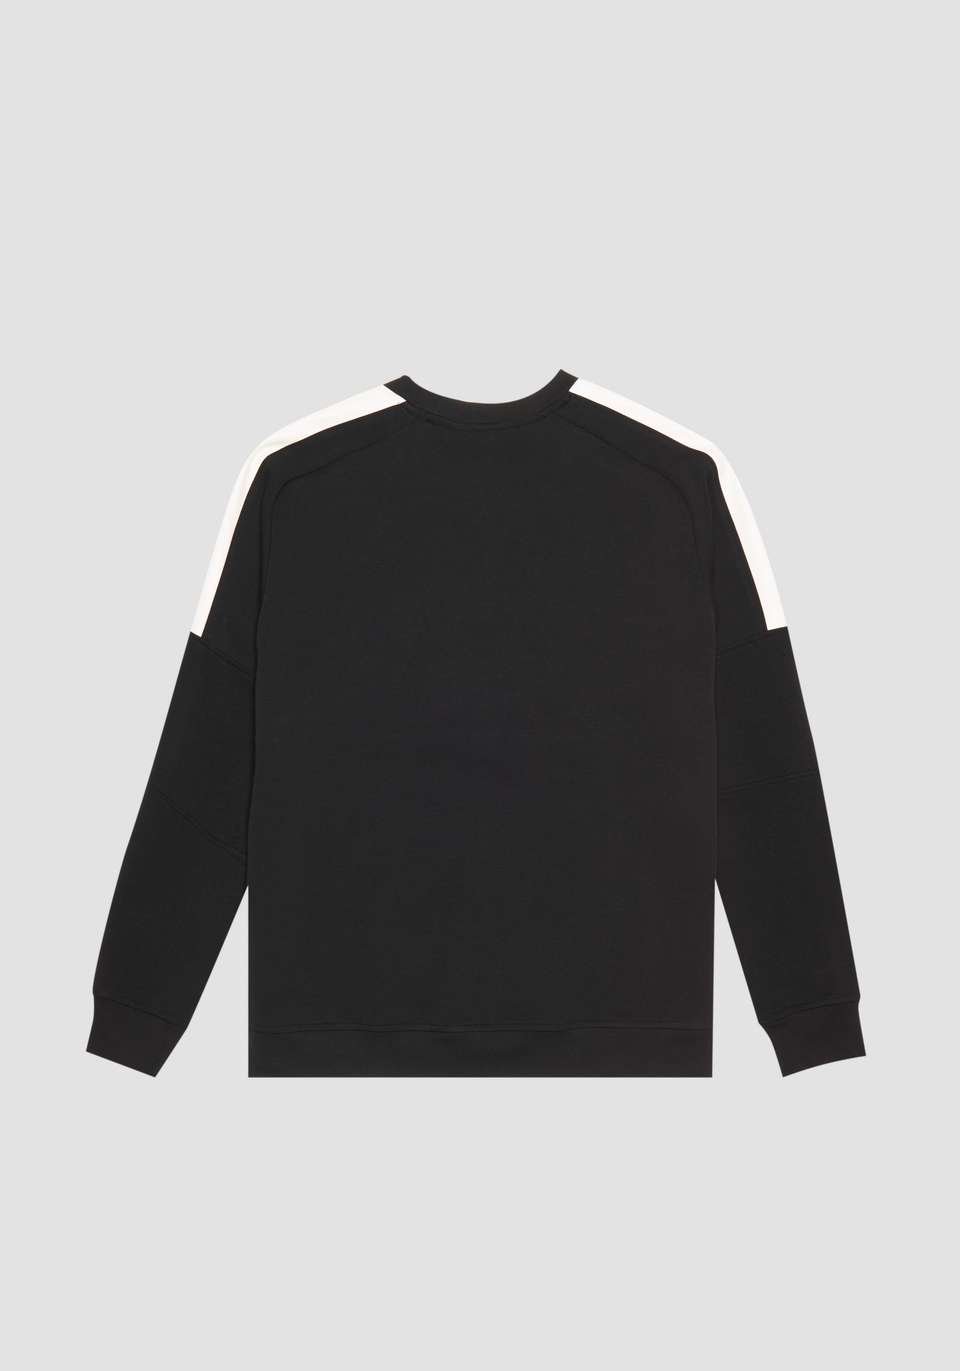 RELAXED FIT SWEATSHIRT IN COTTON BLEND WITH FAUX LEATHER CONTRAST AND RUBBER PRINT - Antony Morato Online Shop